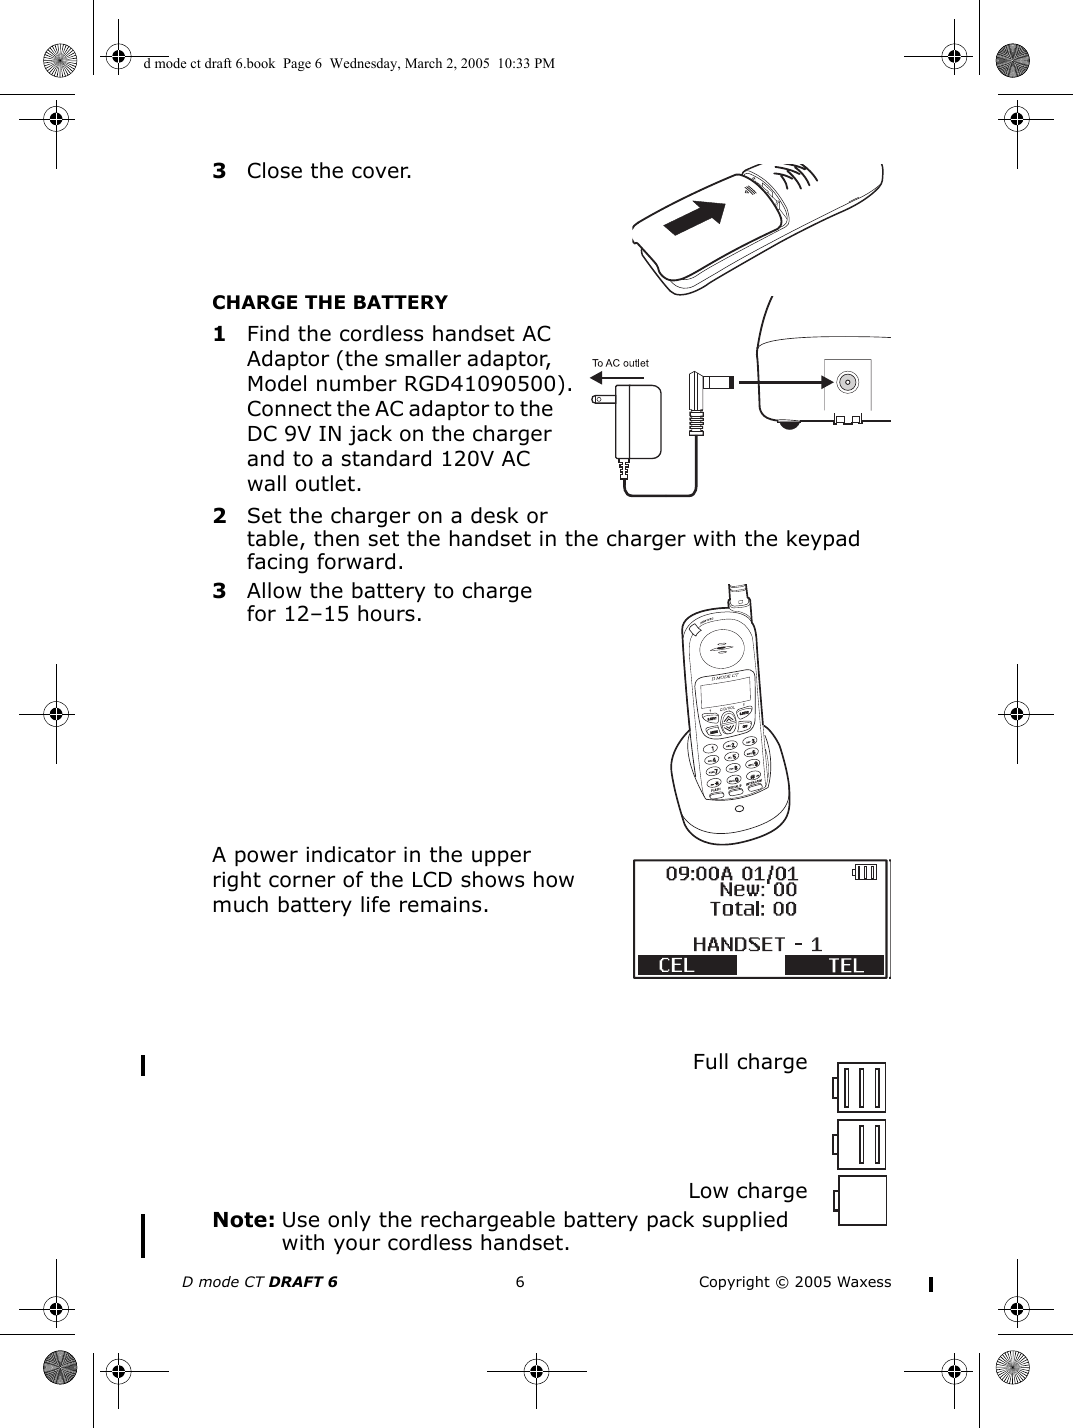 D mode CT DRAFT 6 6 Copyright © 2005 Waxess3Close the cover.CHARGE THE BATTERY1Find the cordless handset AC Adaptor (the smaller adaptor, Model number RGD41090500). Connect the AC adaptor to the DC 9V IN jack on the charger and to a standard 120V AC wall outlet.2Set the charger on a desk or table, then set the handset in the charger with the keypad facing forward.3Allow the battery to charge for 12–15 hours.A power indicator in the upper right corner of the LCD shows how much battery life remains.Full chargeLow chargeNote: Use only the rechargeable battery pack supplied with your cordless handset.d mode ct draft 6.book  Page 6  Wednesday, March 2, 2005  10:33 PM